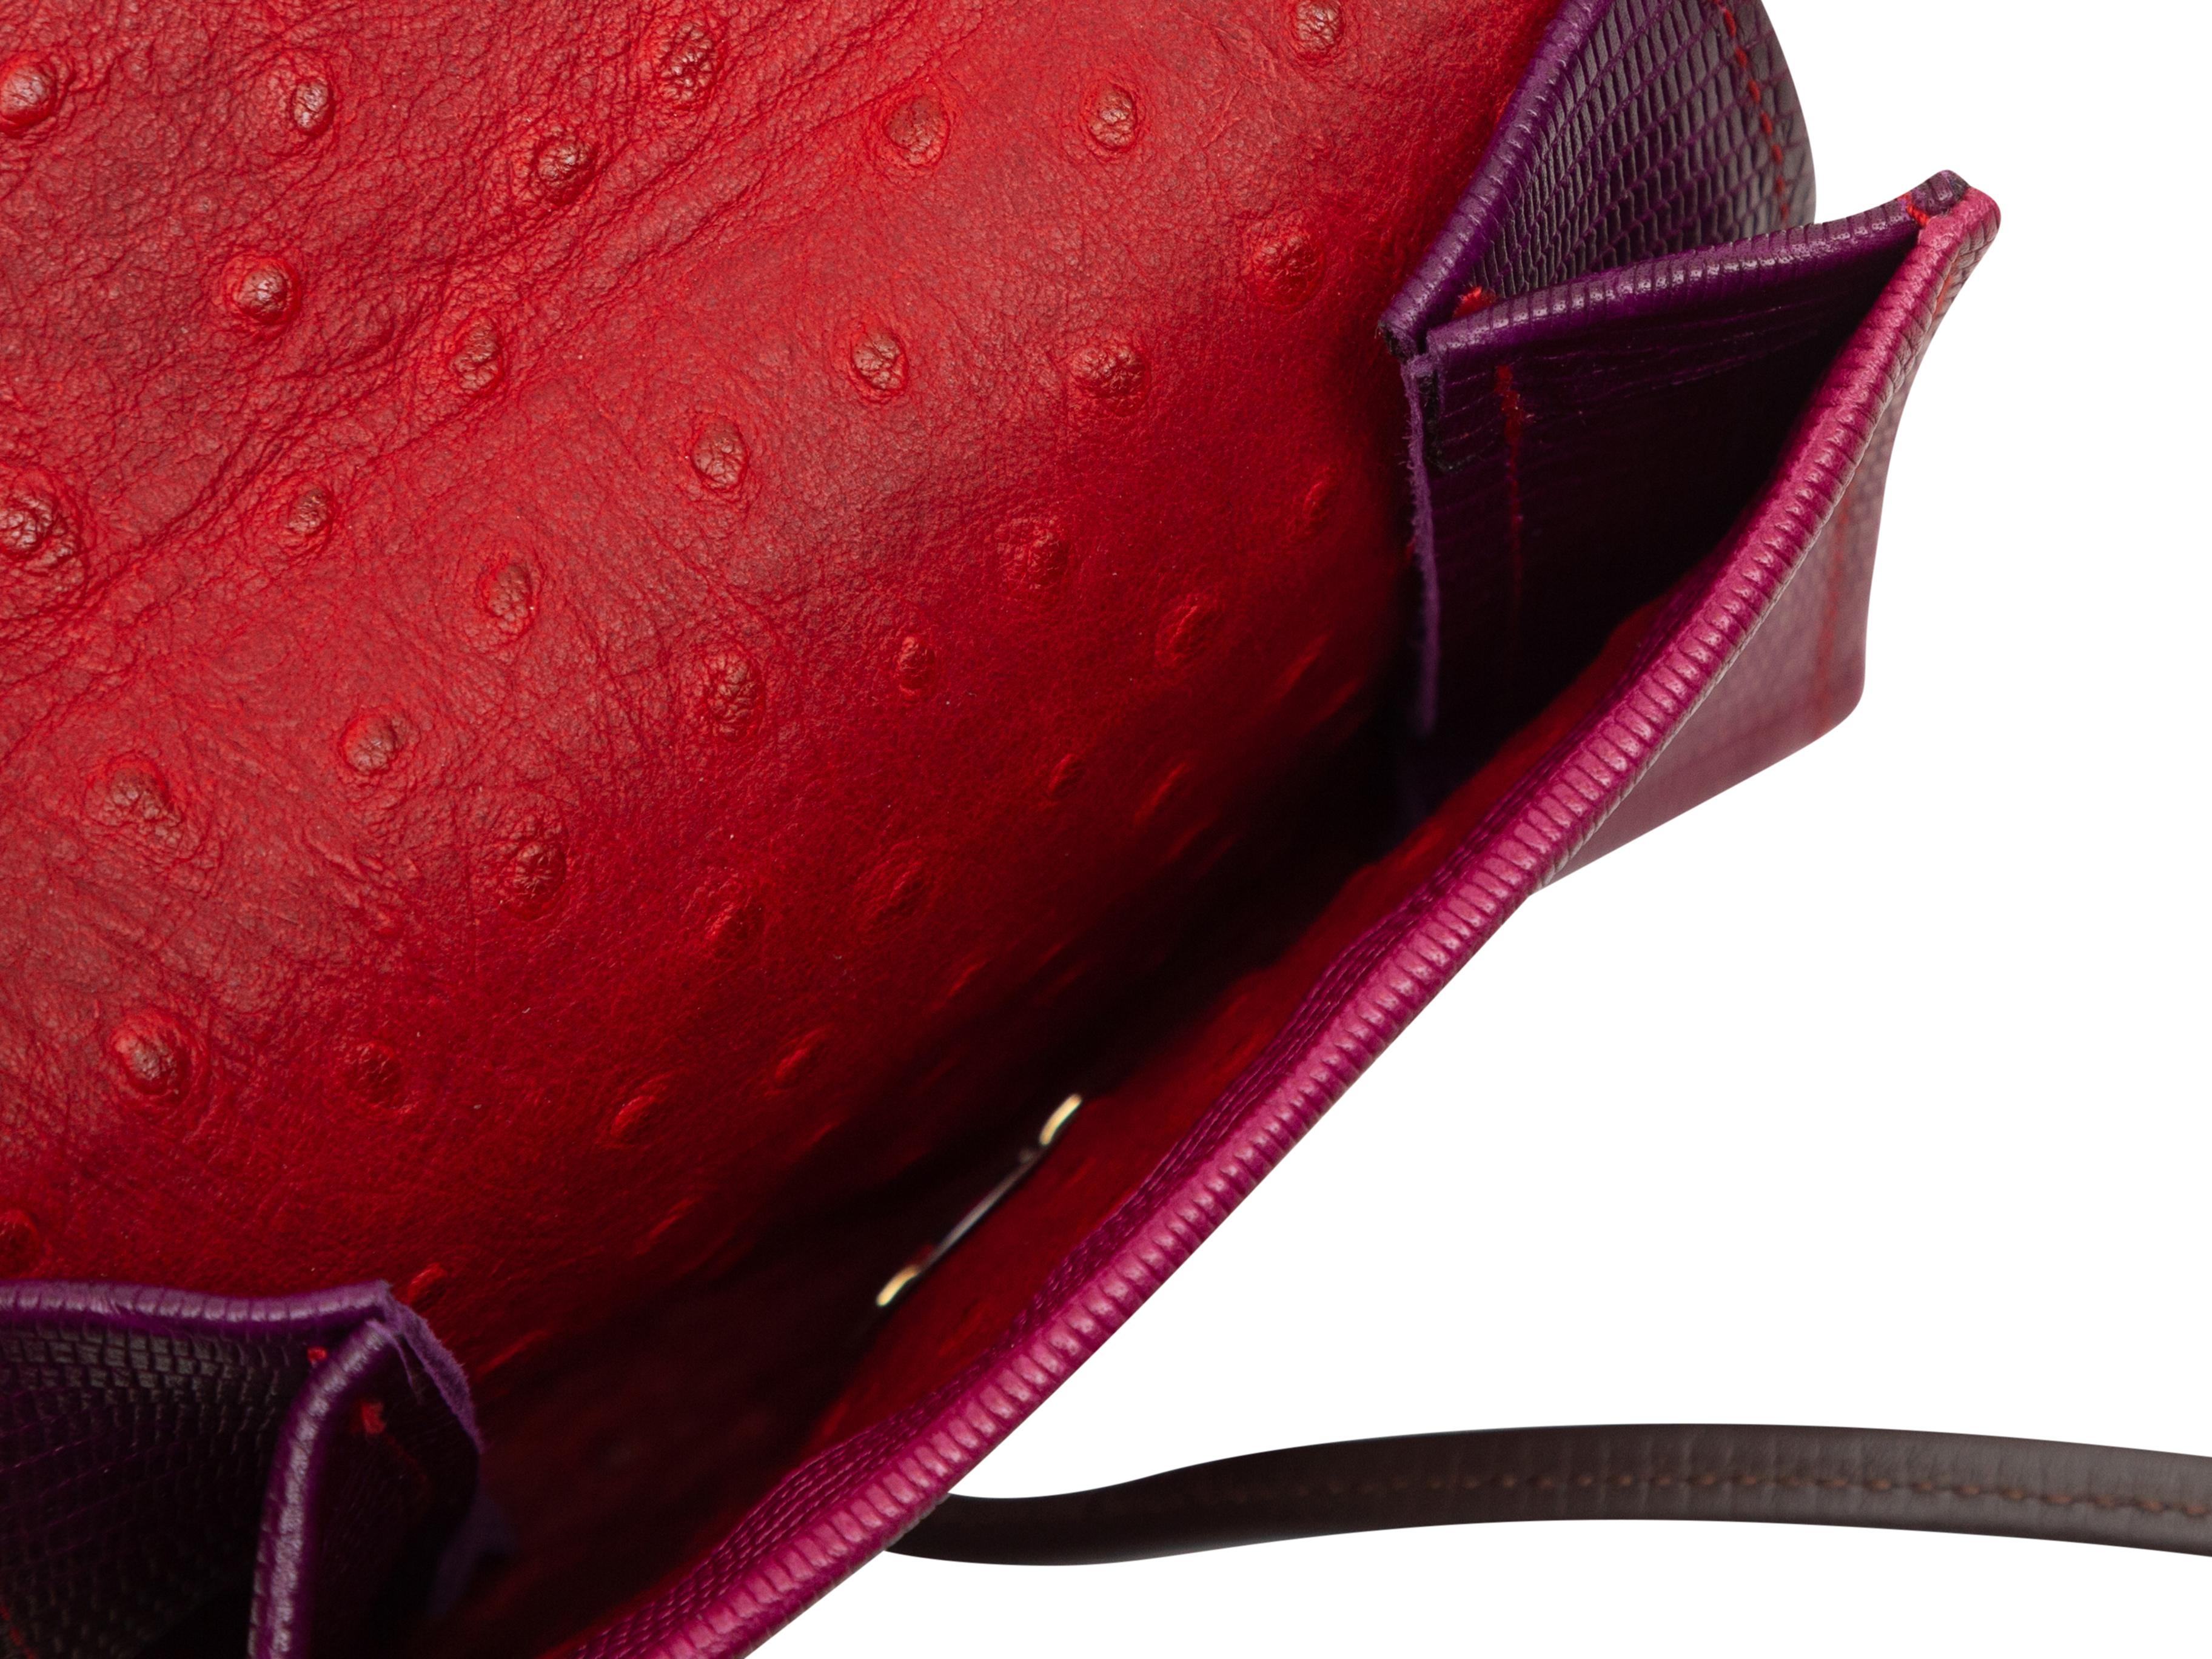 Product details: Fuchsia and red embossed leather crossbody bag by Hans Koch. Black leather shoulder strap. Magnetic closure at front flap. 6